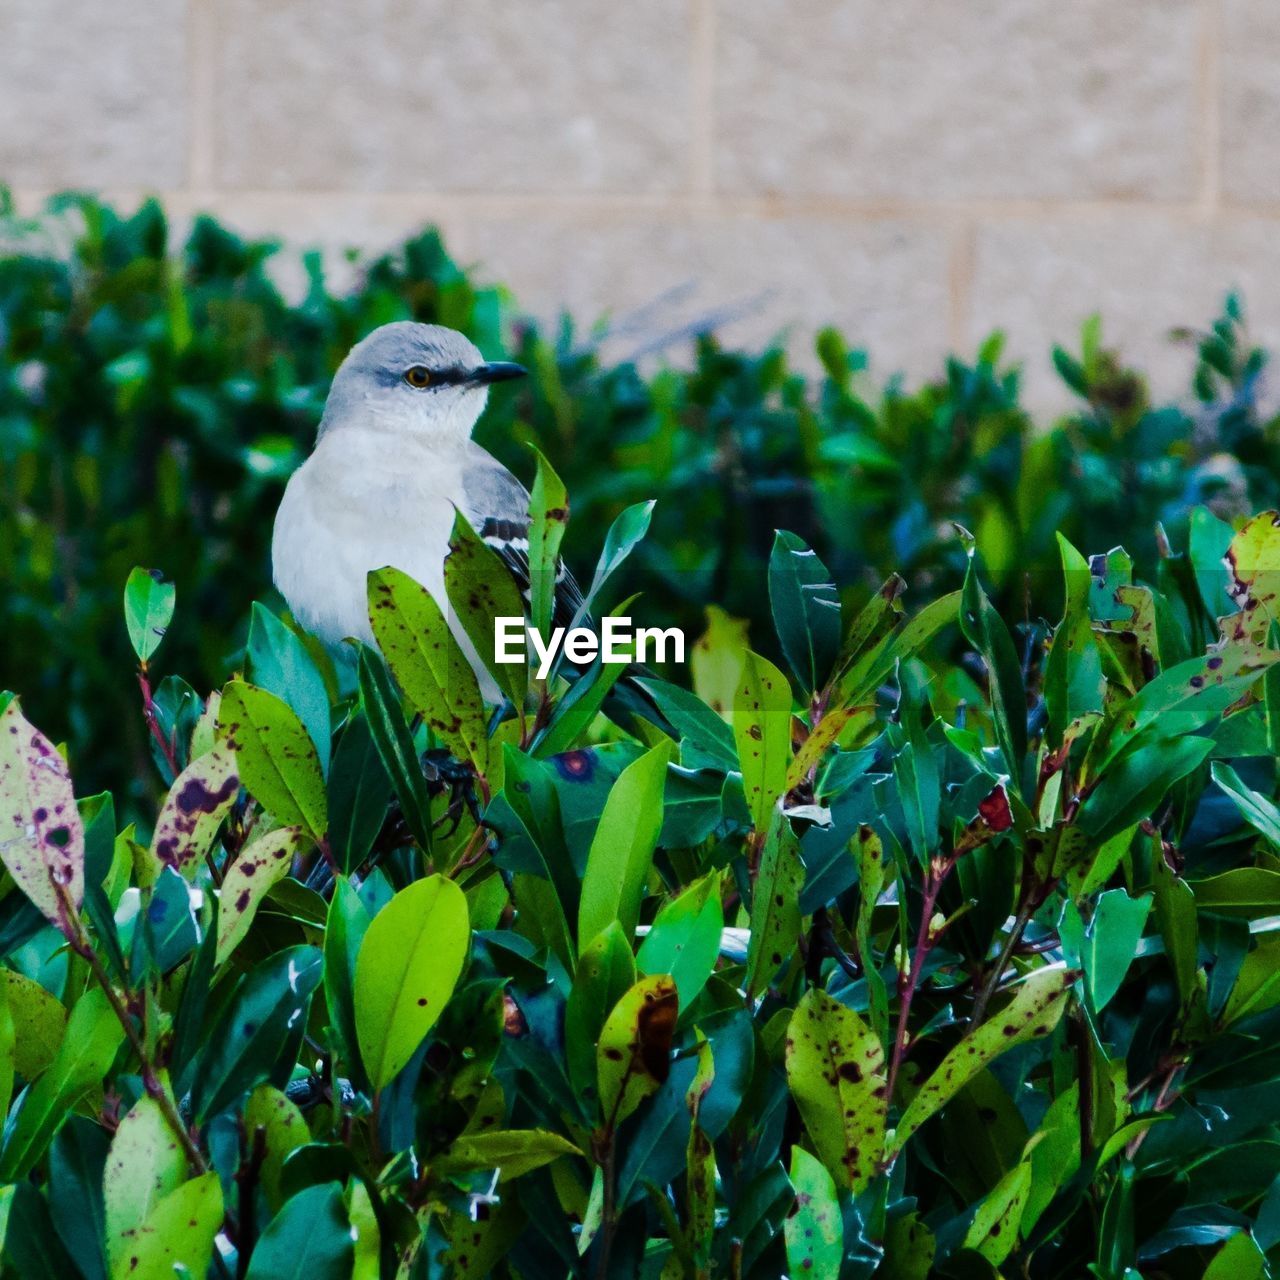 Close-up of a bird amid leaves